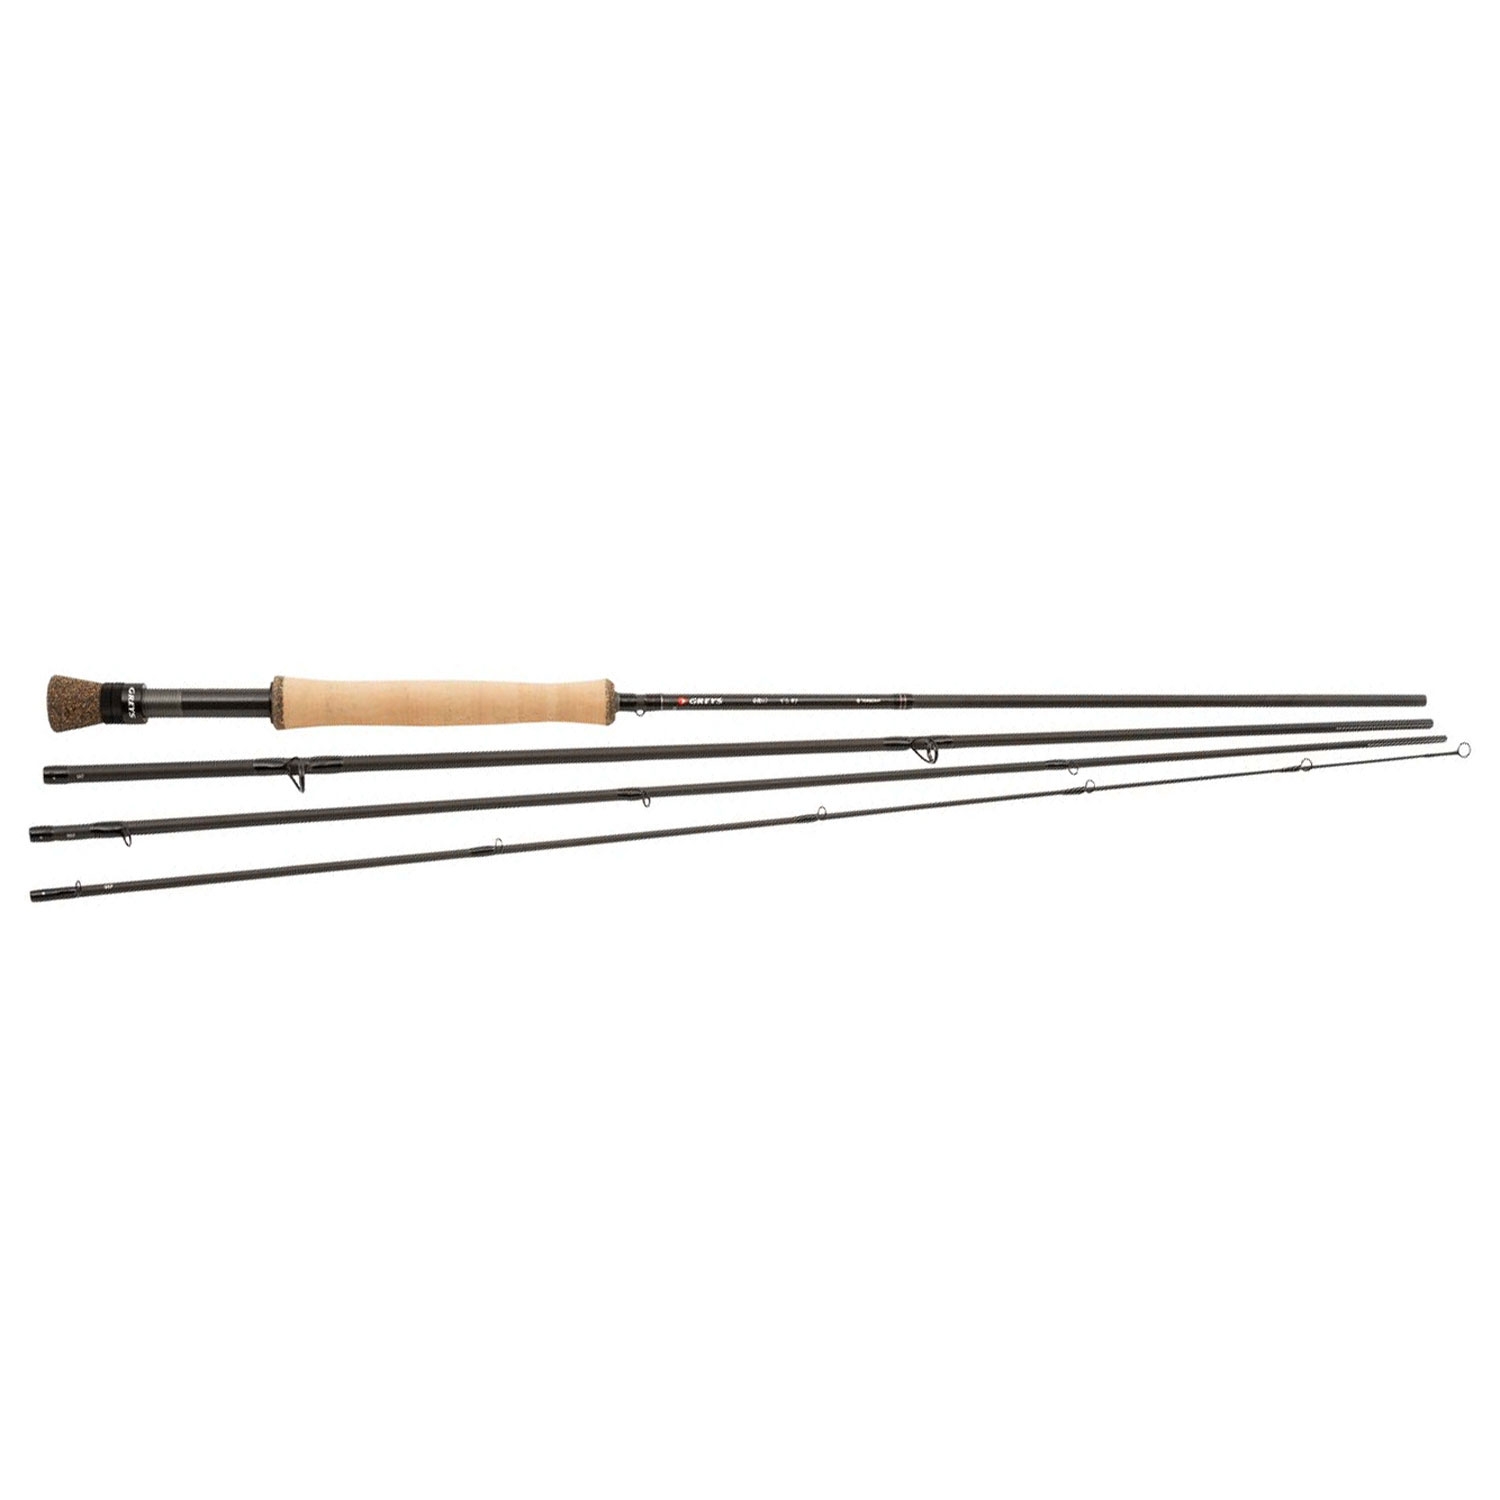 Greys GR60 Fly Rod - Trout Single Handed Fly Fishing Rods